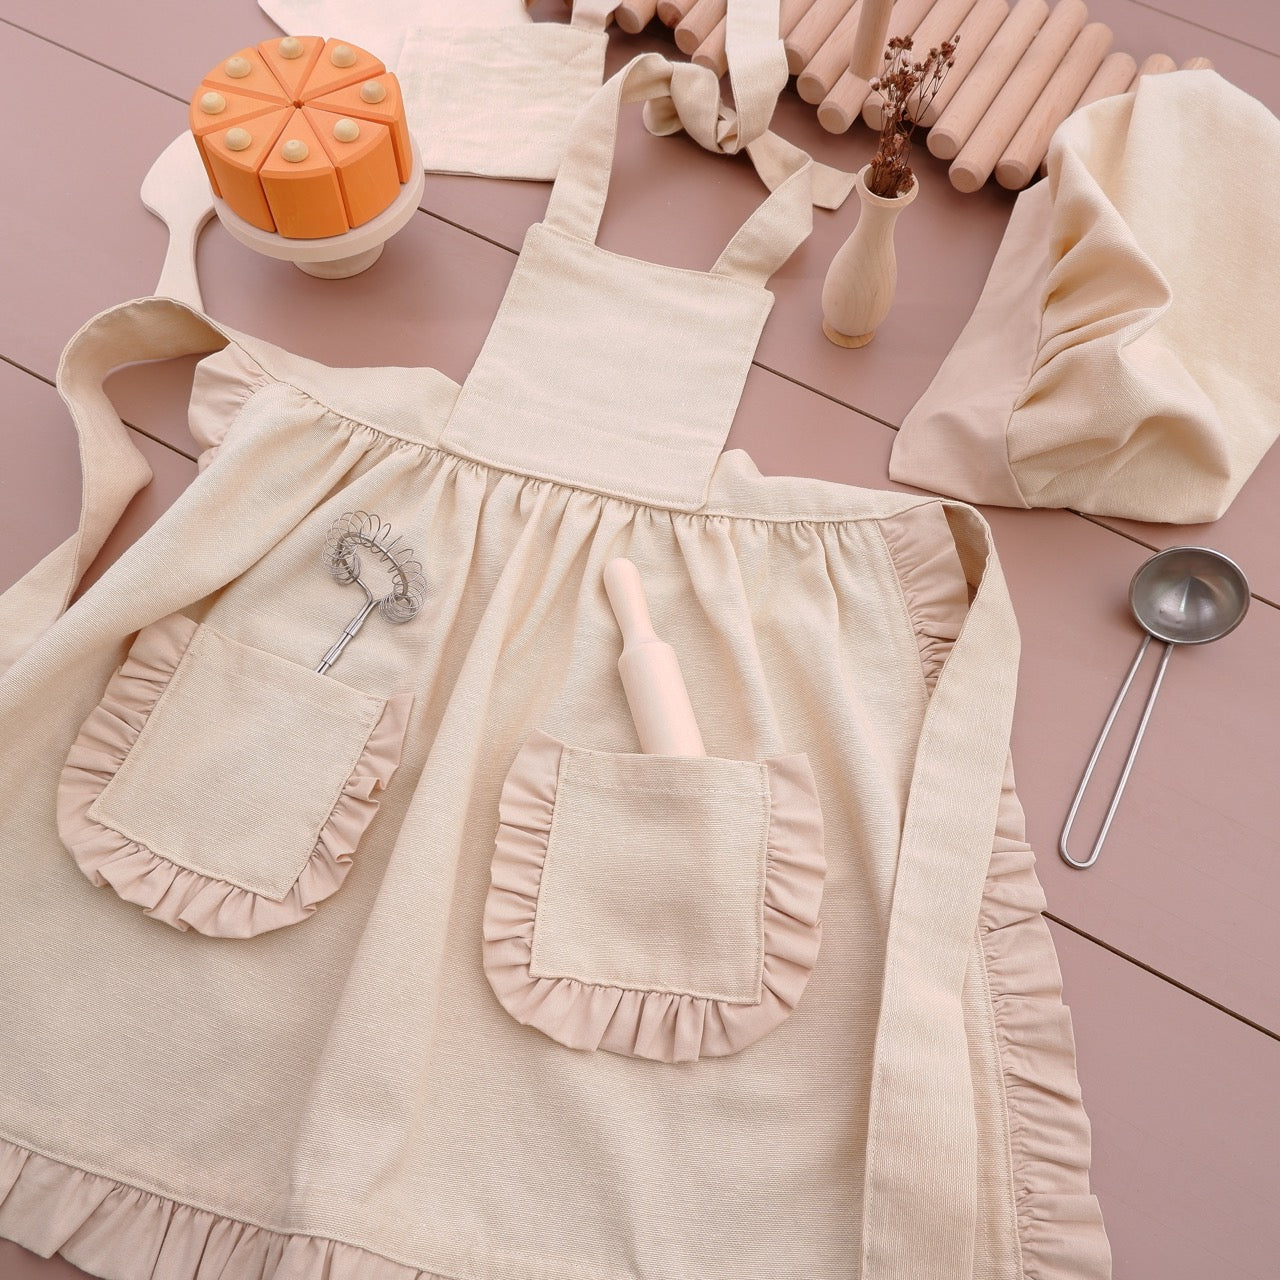 Apron Set for Playing, Apron Set for Little Chefs For Wooden Play Kitchen